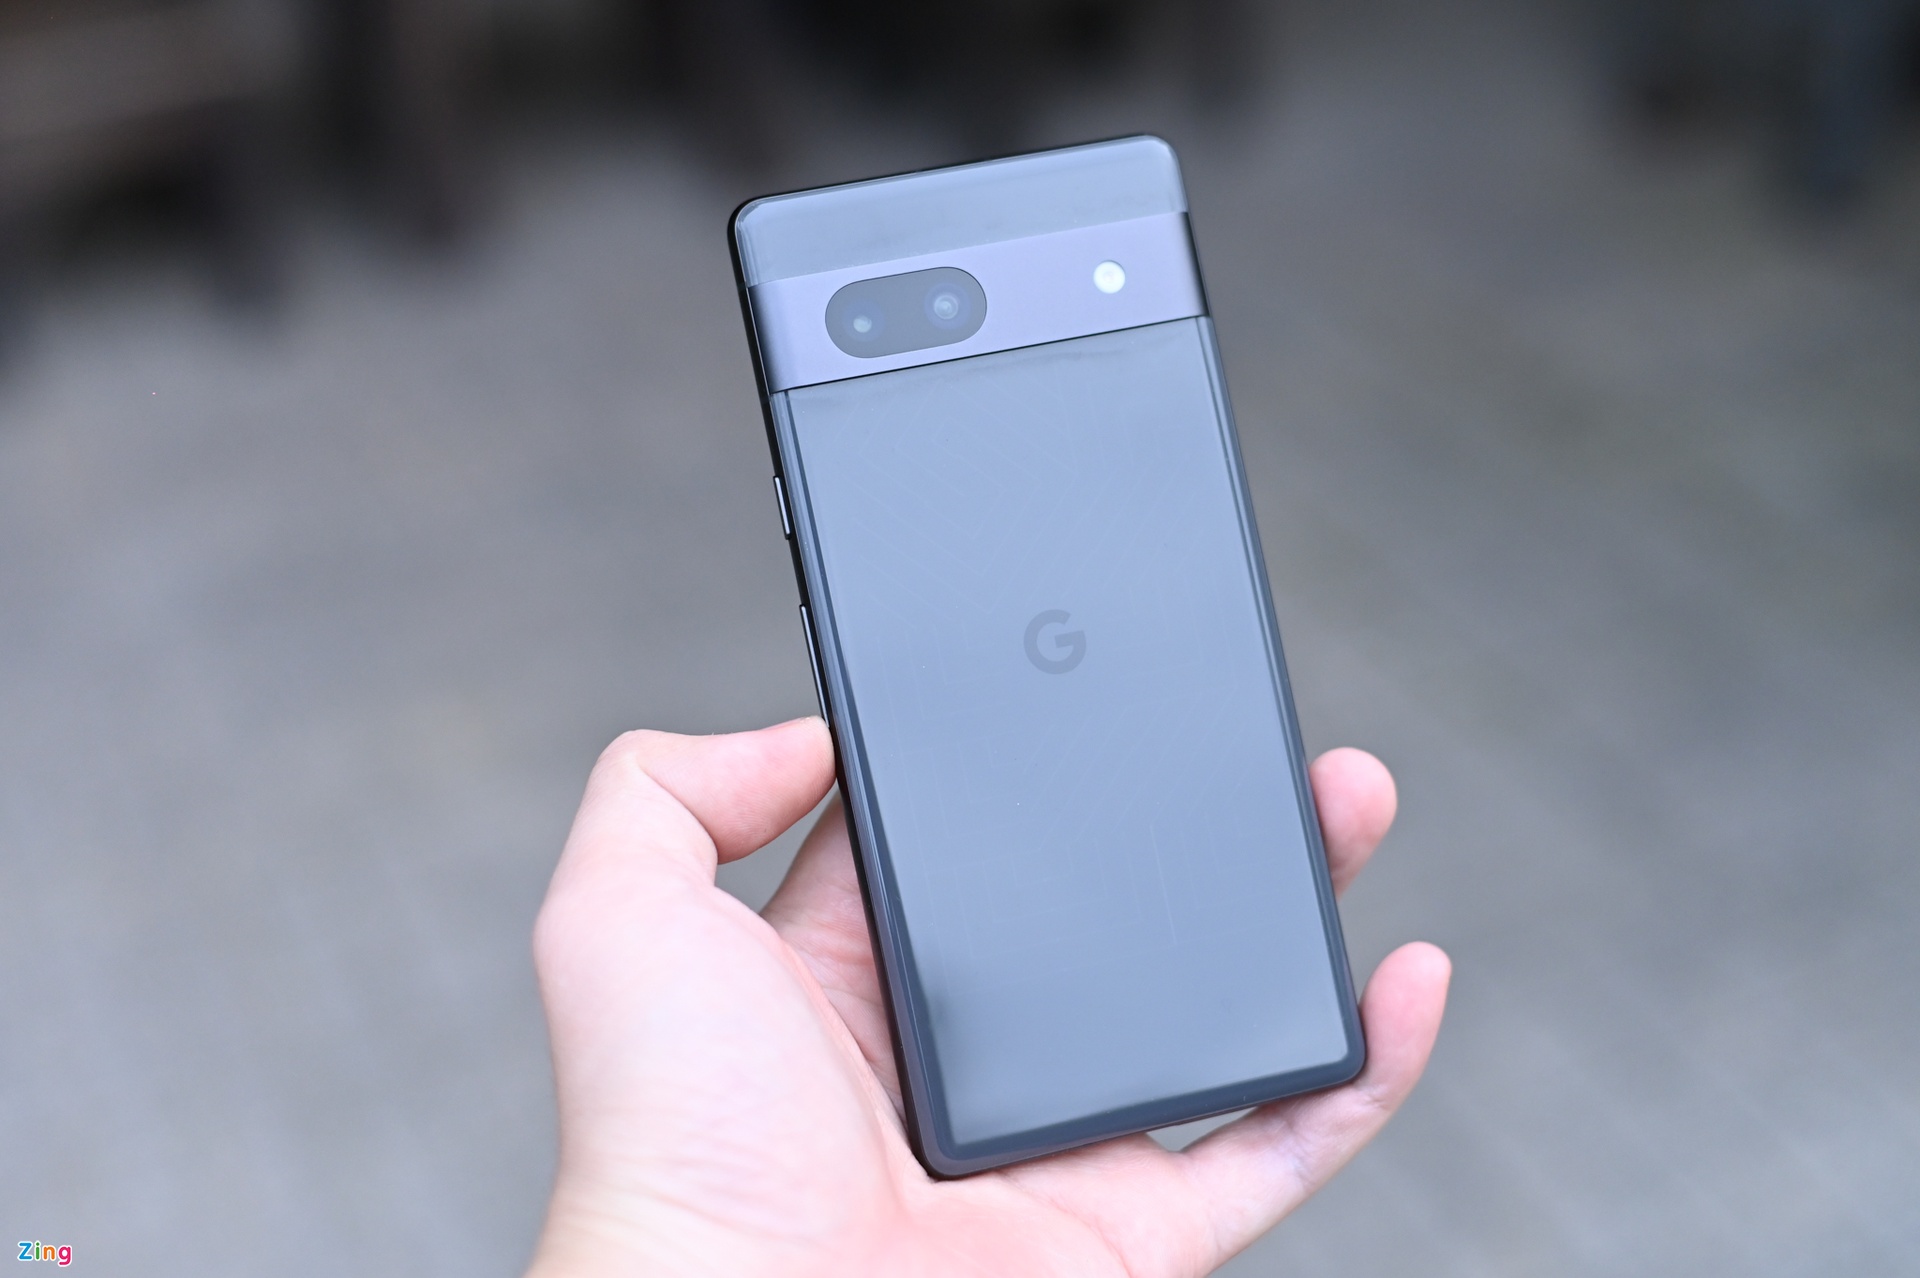 Google Pixel 7a color options and spec sheet leaked